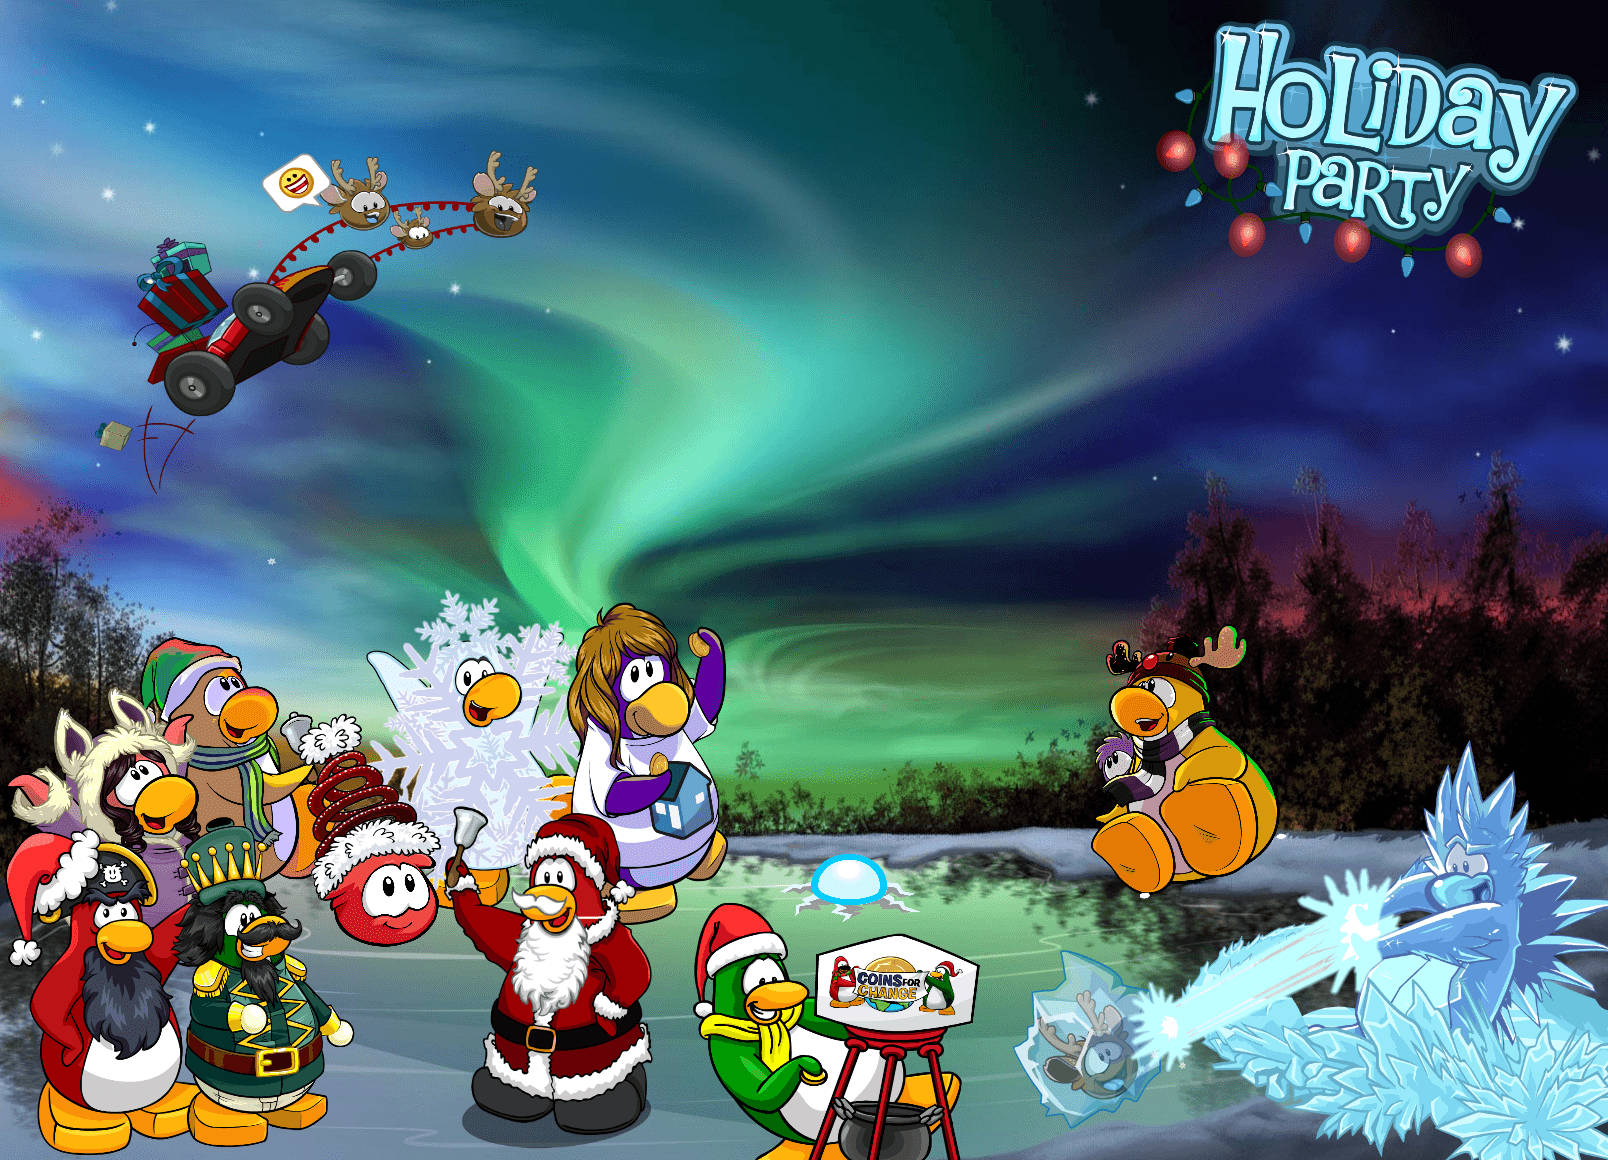 Download Club Penguin Christmas Party Flyer Wallpaper 